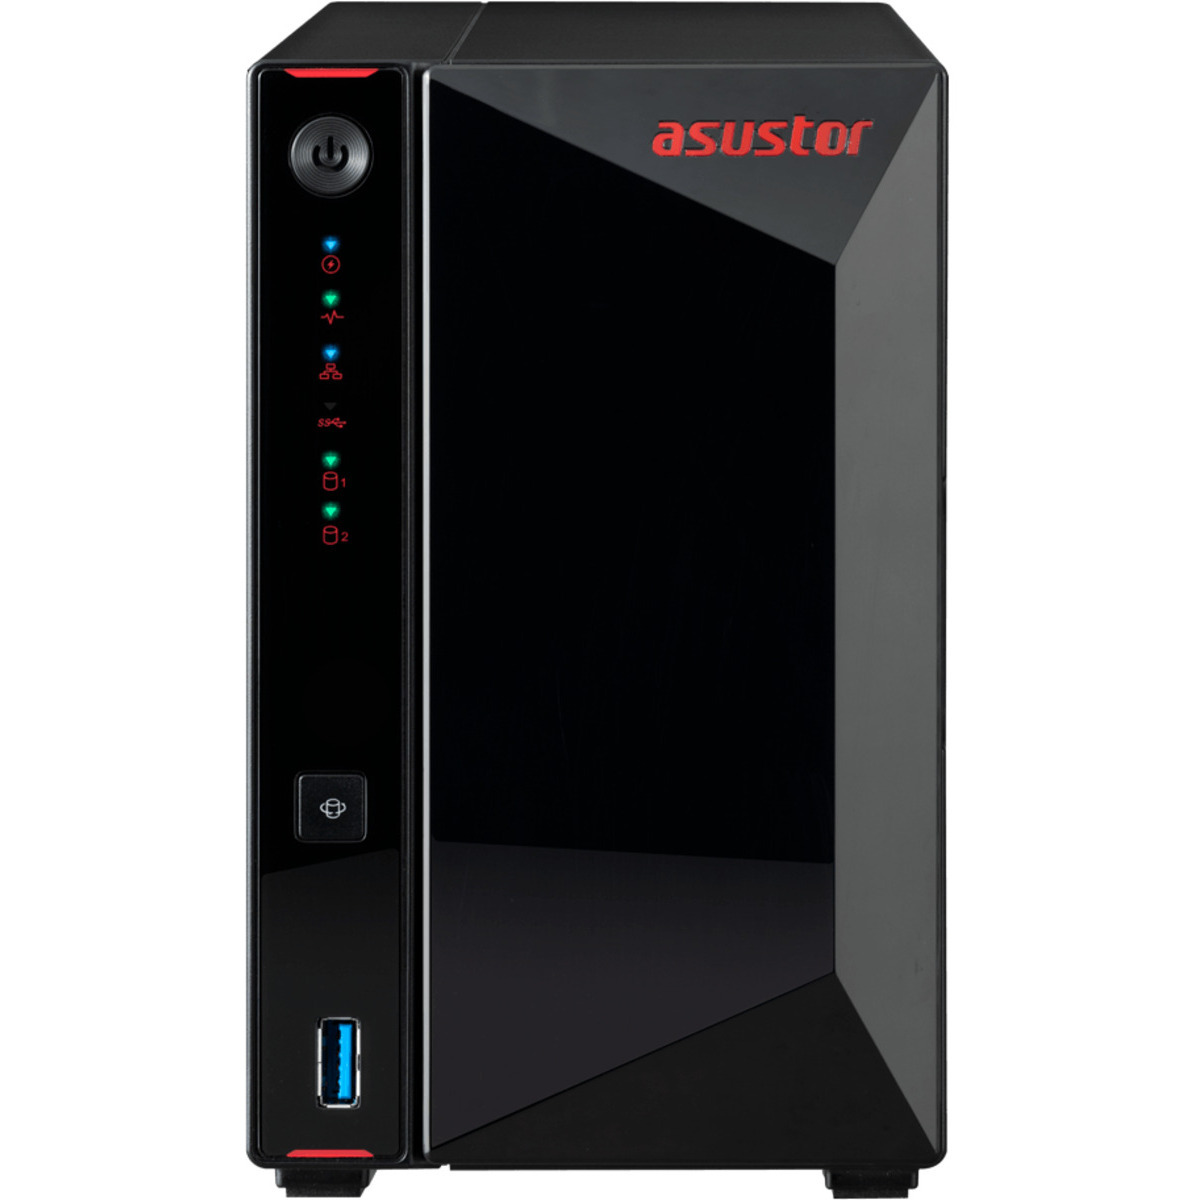 buy $569 ASUSTOR AS5202T Nimbustor 2tb Desktop NAS - Network Attached Storage Device 2x1000gb Seagate IronWolf ST1000VN002 3.5 5900rpm SATA 6Gb/s HDD NAS Class Drives Installed - Burn-In Tested - FREE RAM UPGRADE - nas headquarters buy network attached storage server device das new raid-5 free shipping usa AS5202T Nimbustor